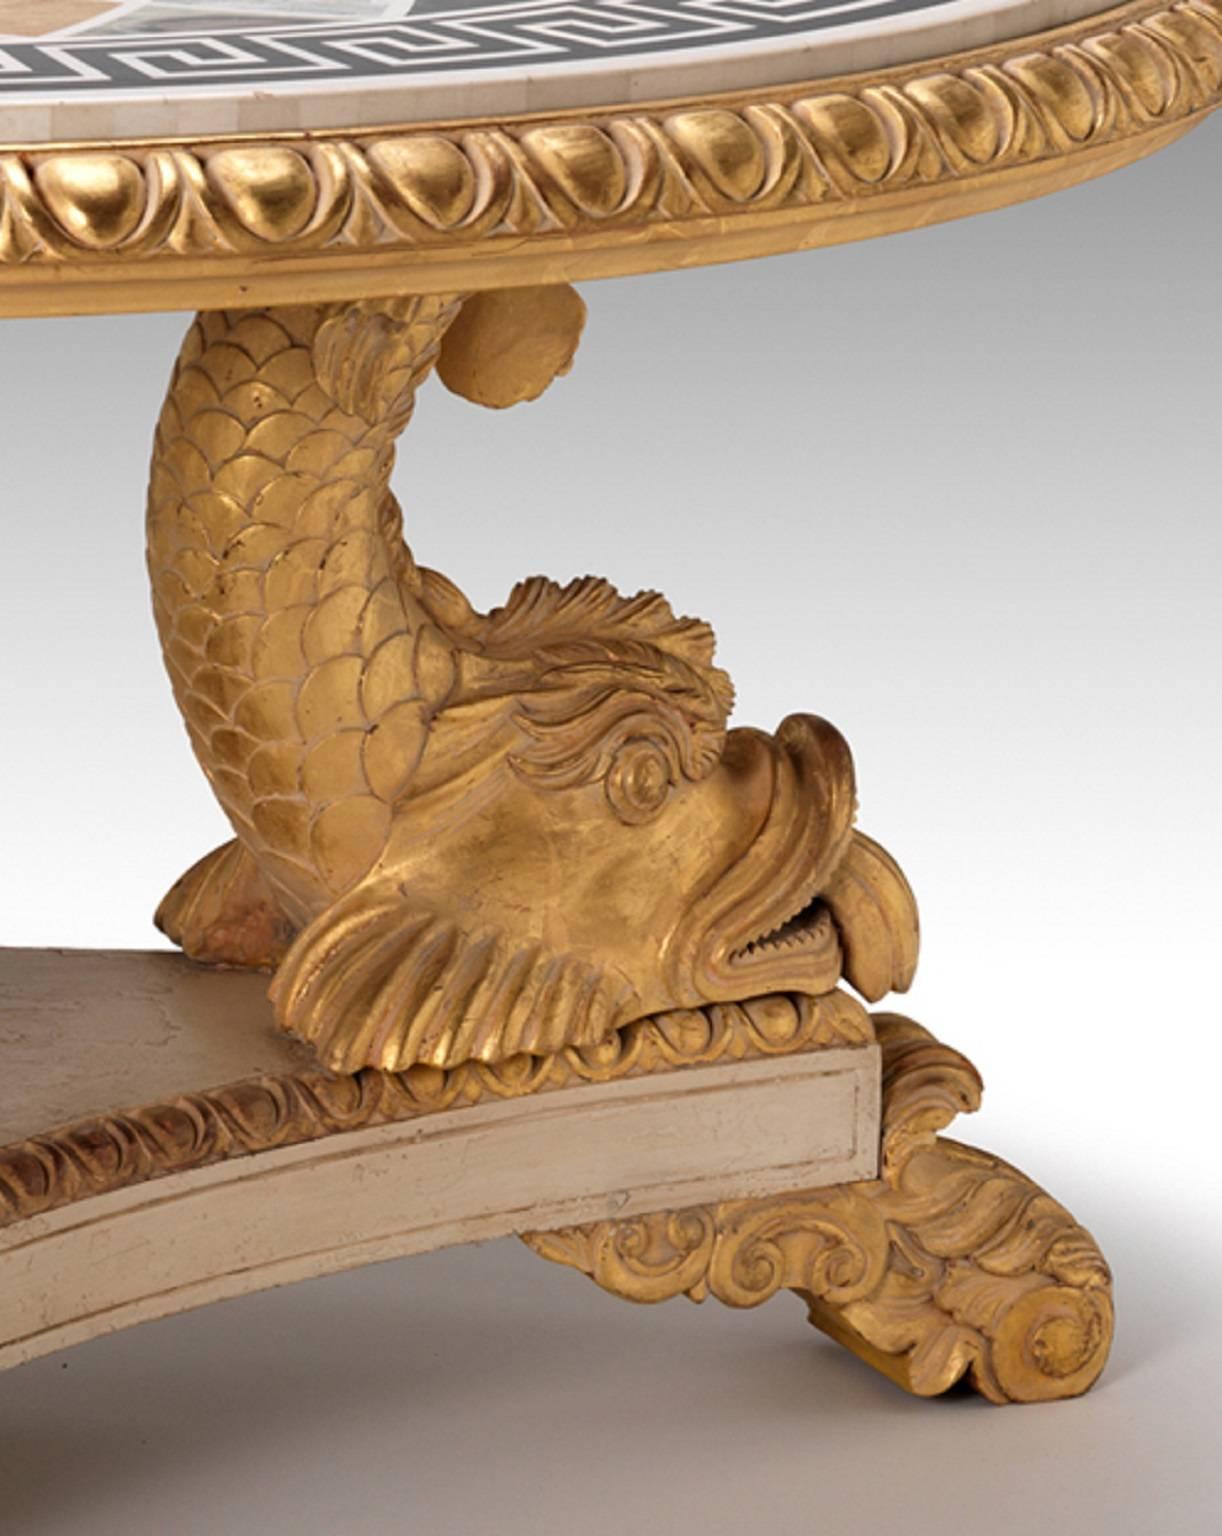 A fine Regency design circular centre table with inset marble geometric inlaid top within an egg-and-dart frieze supported on three carved stylized dolphins resting upon an aged gessoed triform base with gilded wood carved foliate feet.

This item